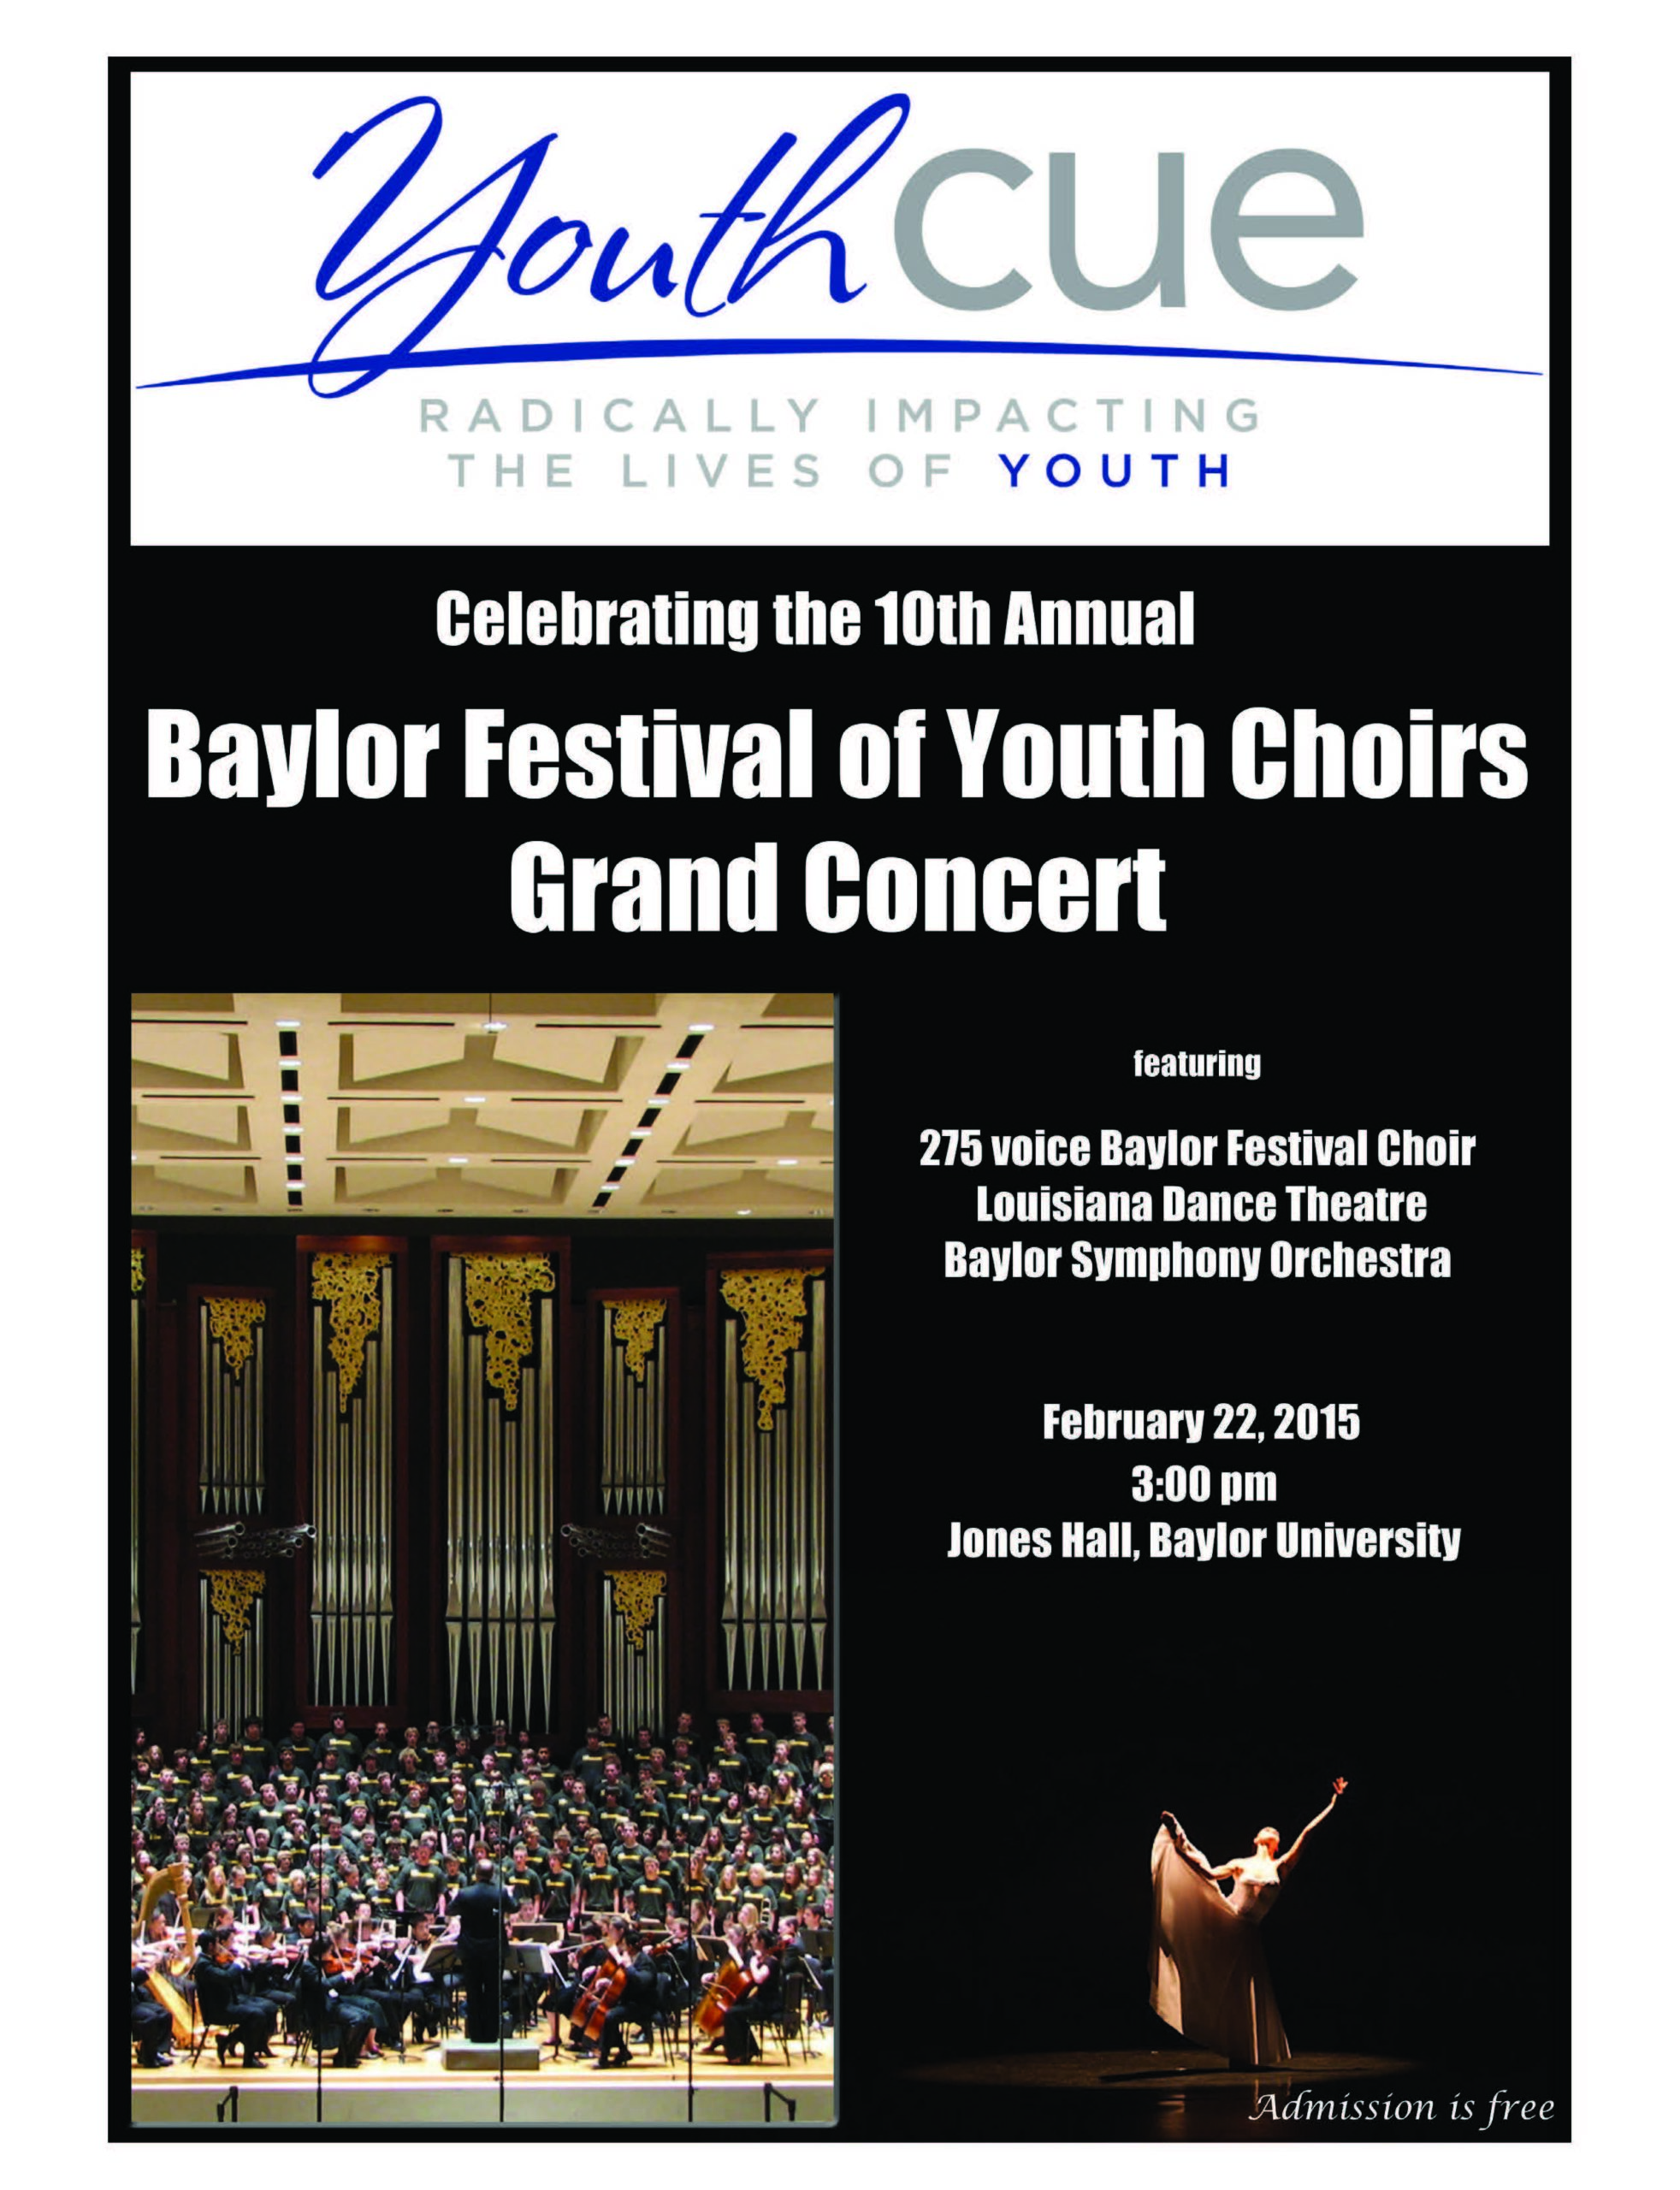 The Baylor Festival at 10 – always something special!